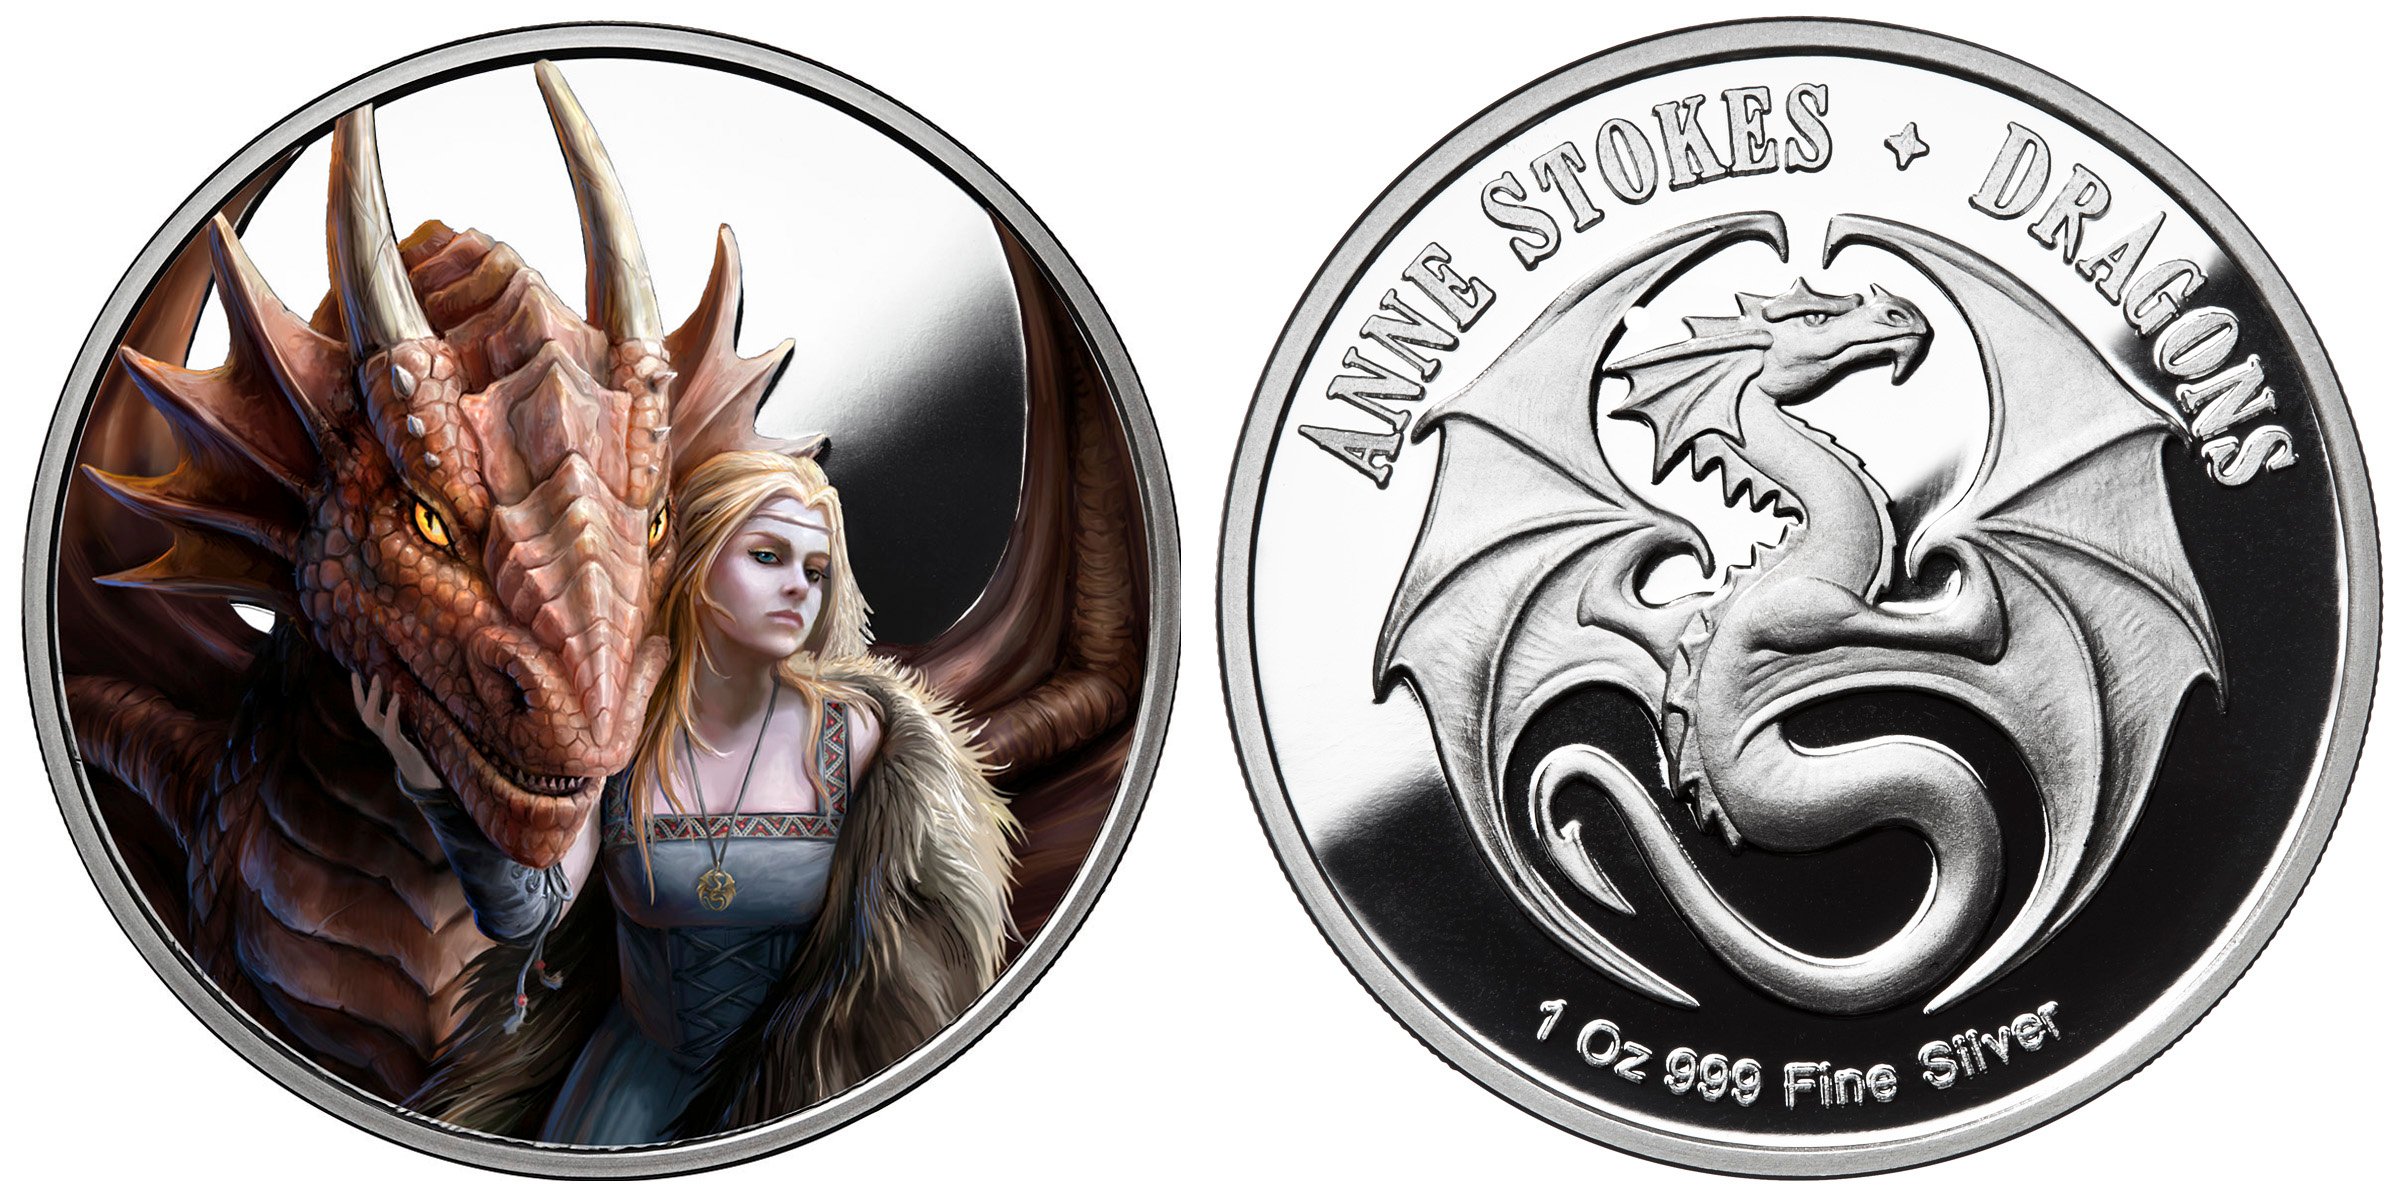 Friend or Foe 1 oz Silver Colorized Round Anne Stokes Dragons SKU#169632